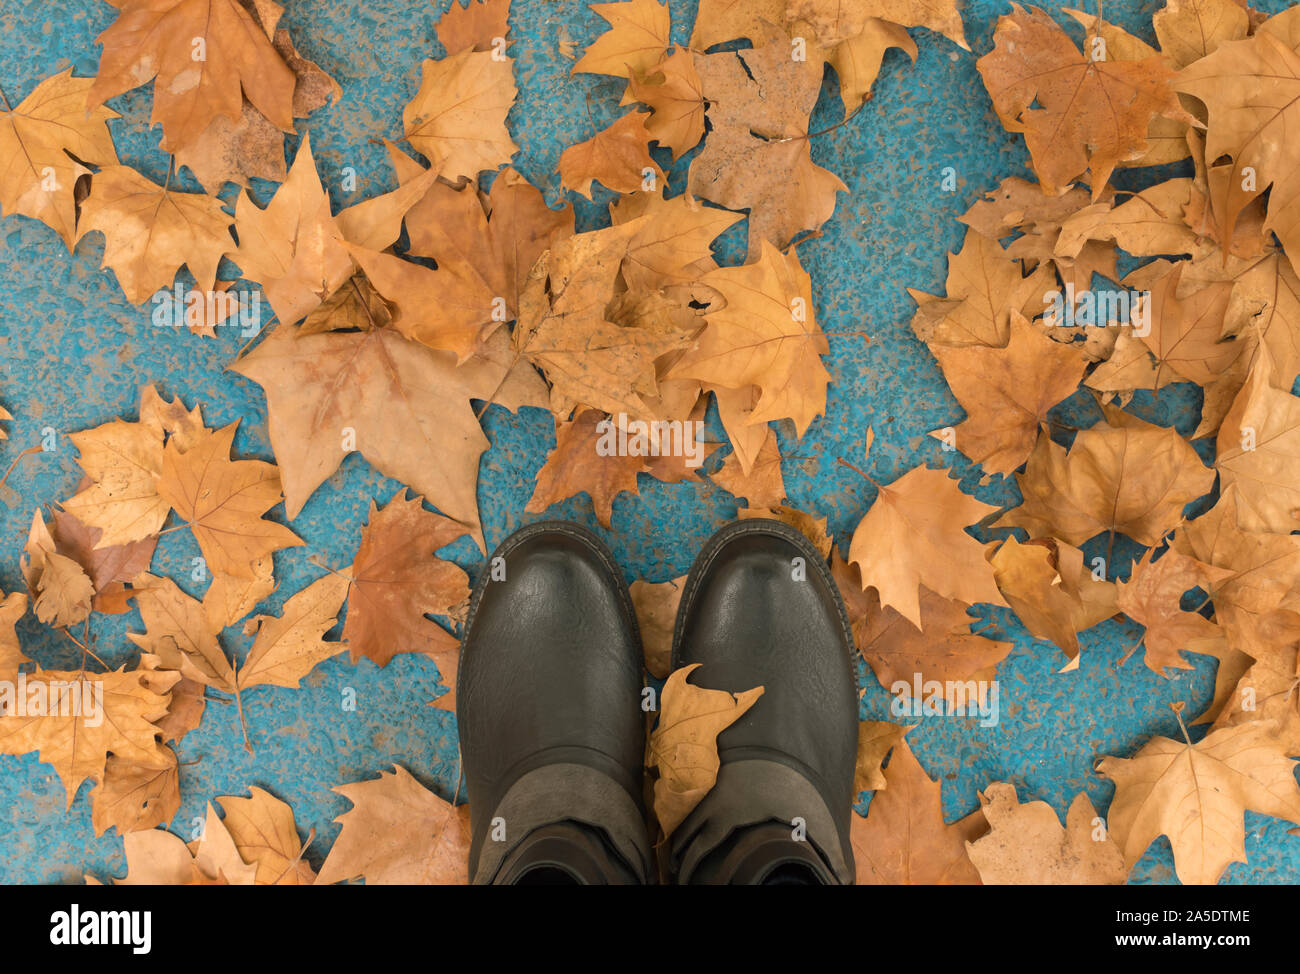 Feet stepping on dry autumn leaves, on a blue city floor Stock Photo